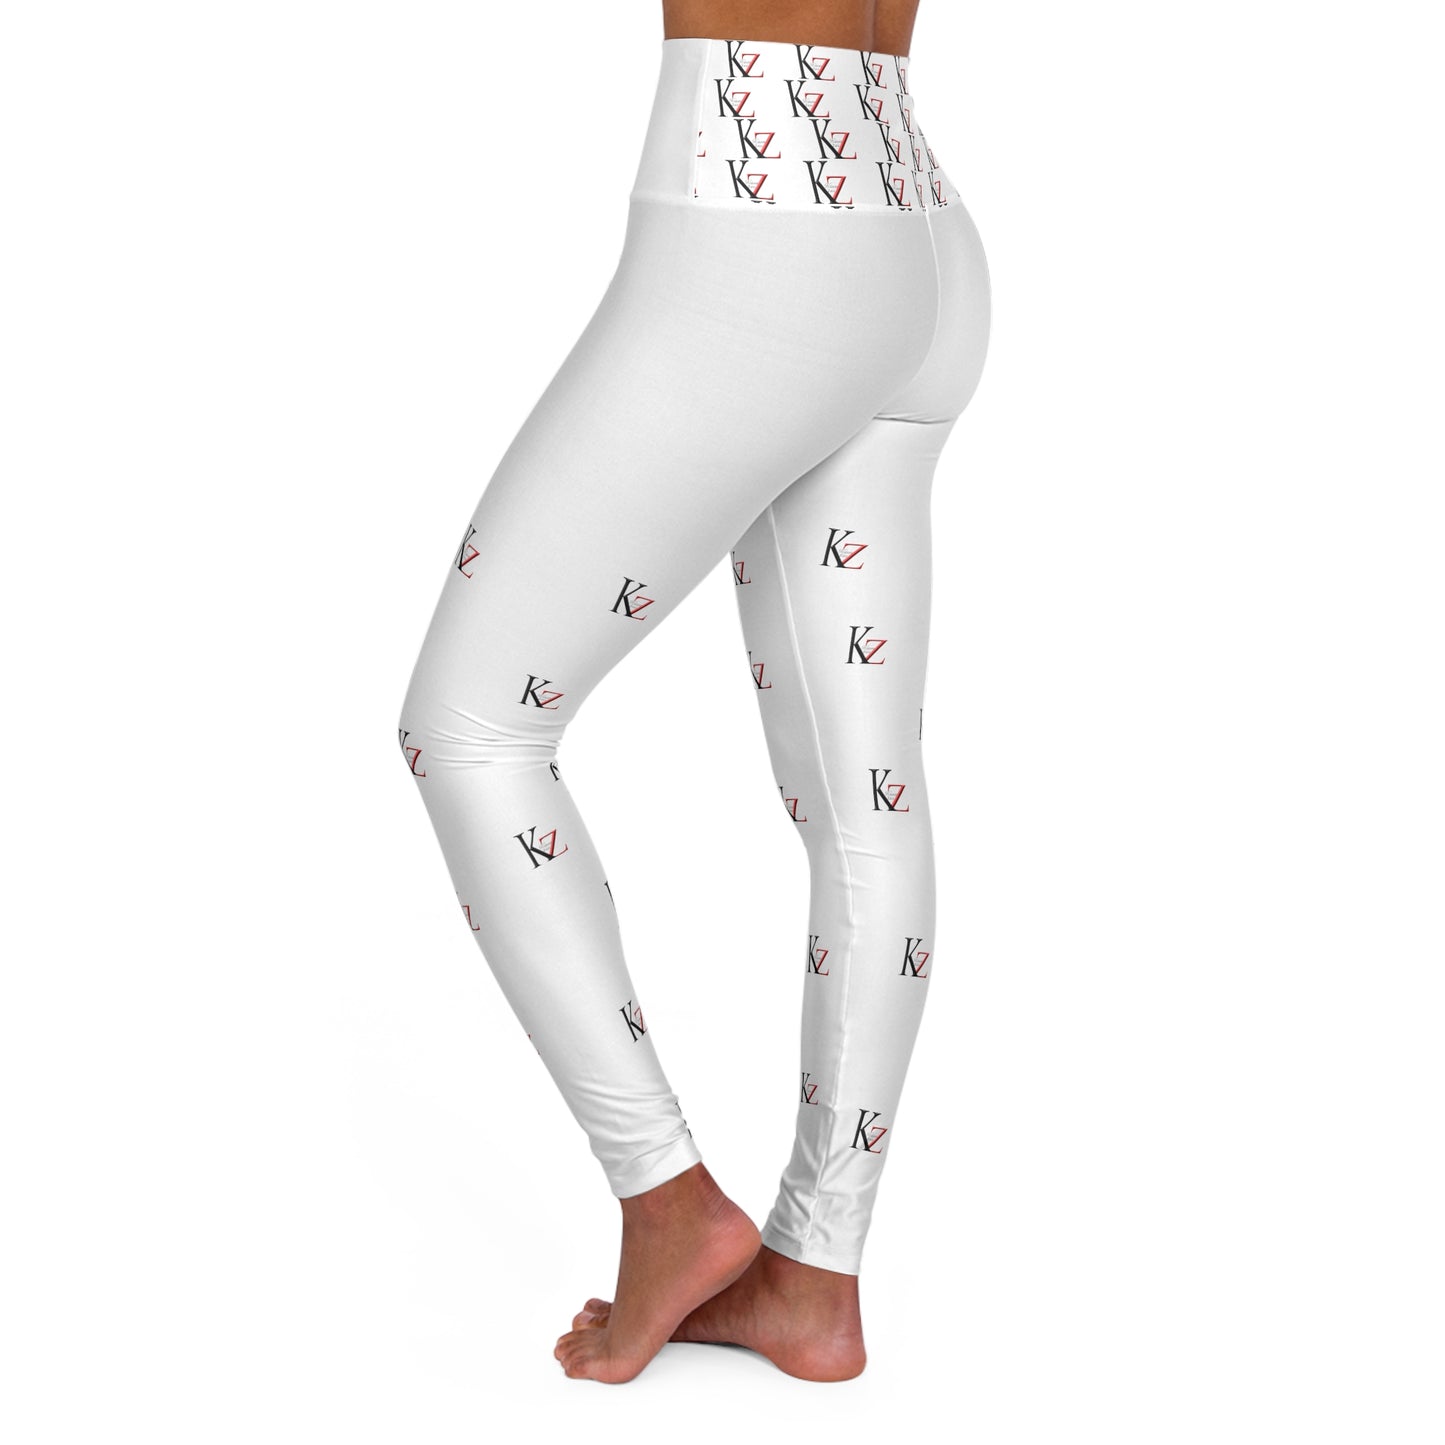 High Waisted  KZ monogram Leggings (white)) For an optimal fit, check out the KZ monogram Leggings. Crafted with stretchy fabric, these leggings feature a high-waisted and slim fit. Plus, the iconic Kalent Zaiz logo is featured around the waistband.